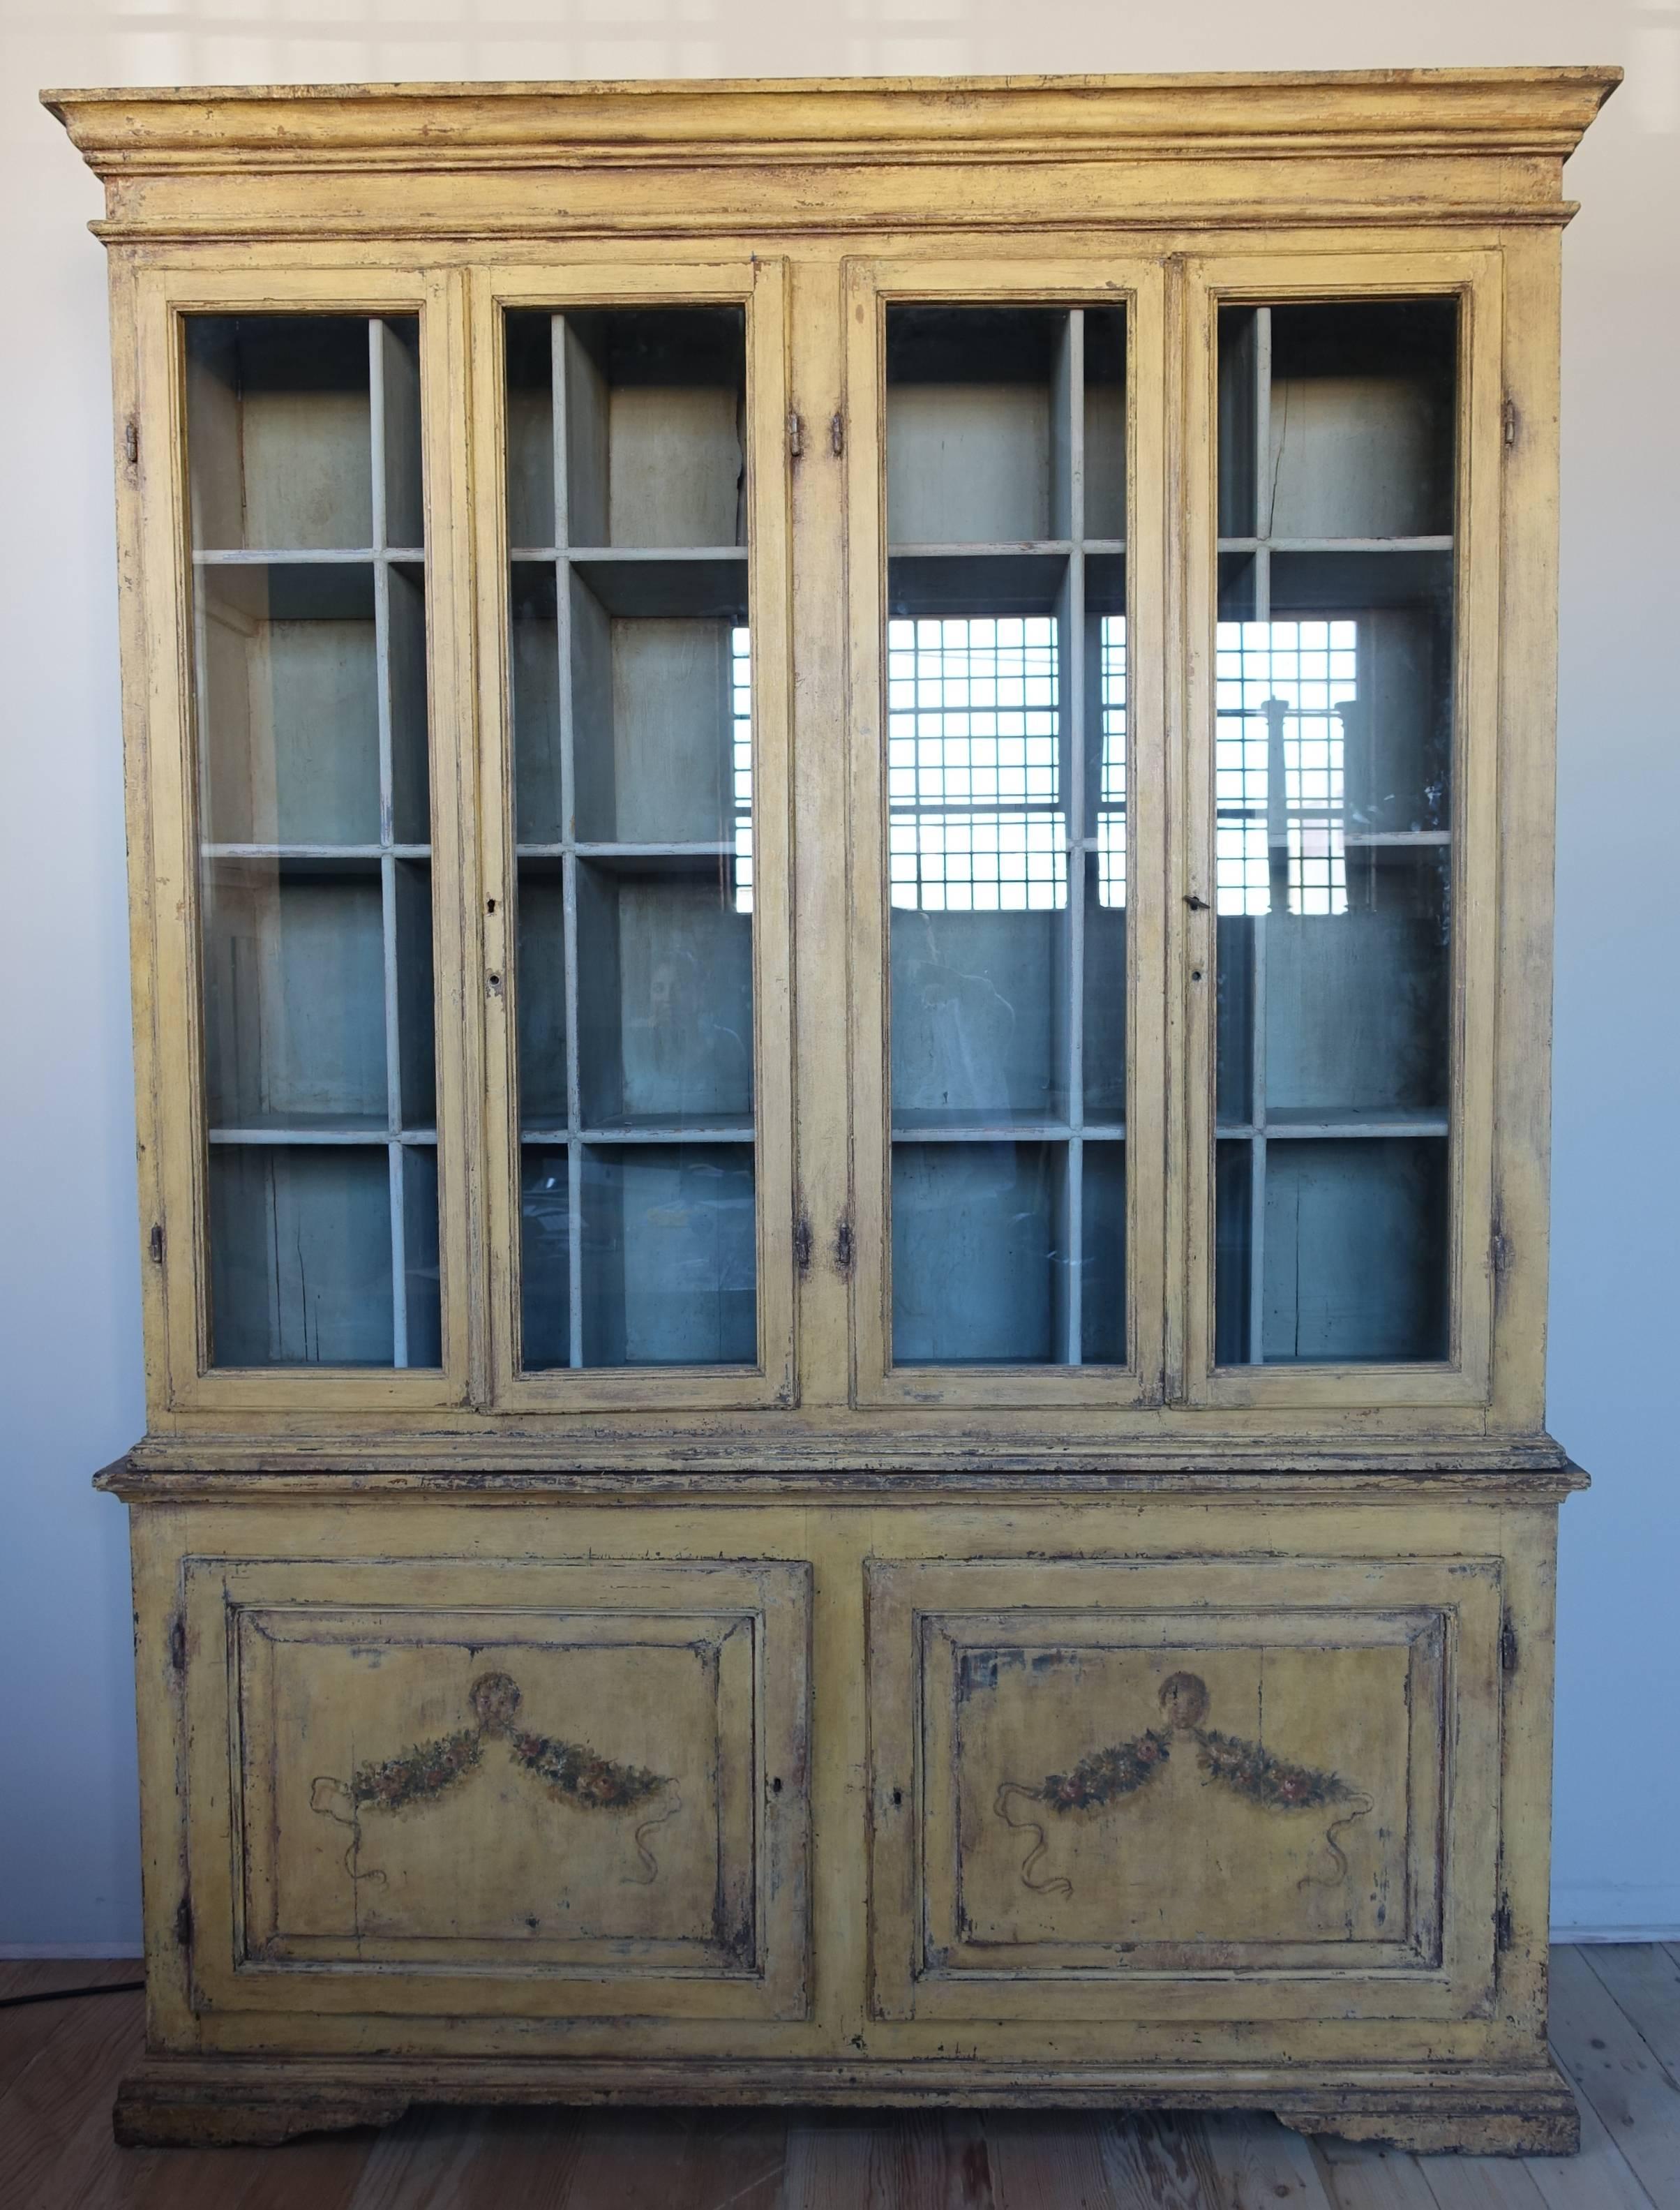 19th century hand-painted soft golden colored cabinet with painted garlands. Two storage doors with shelve on the bottom of the cabinet. Original antique glass.